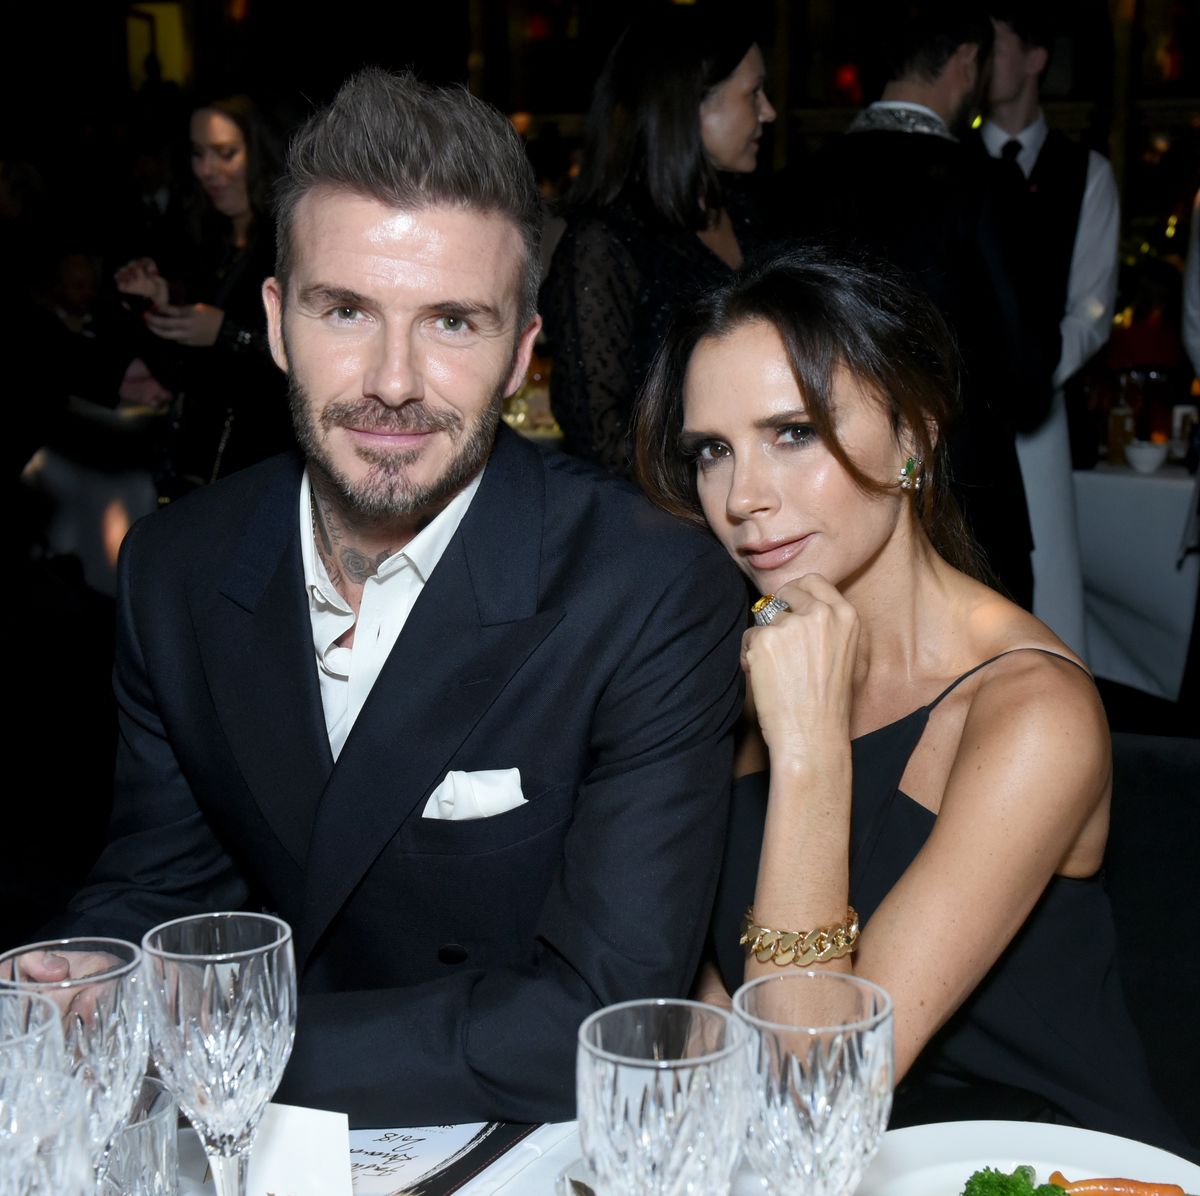 Victoria Beckham shares sweet throwback pregnancy picture